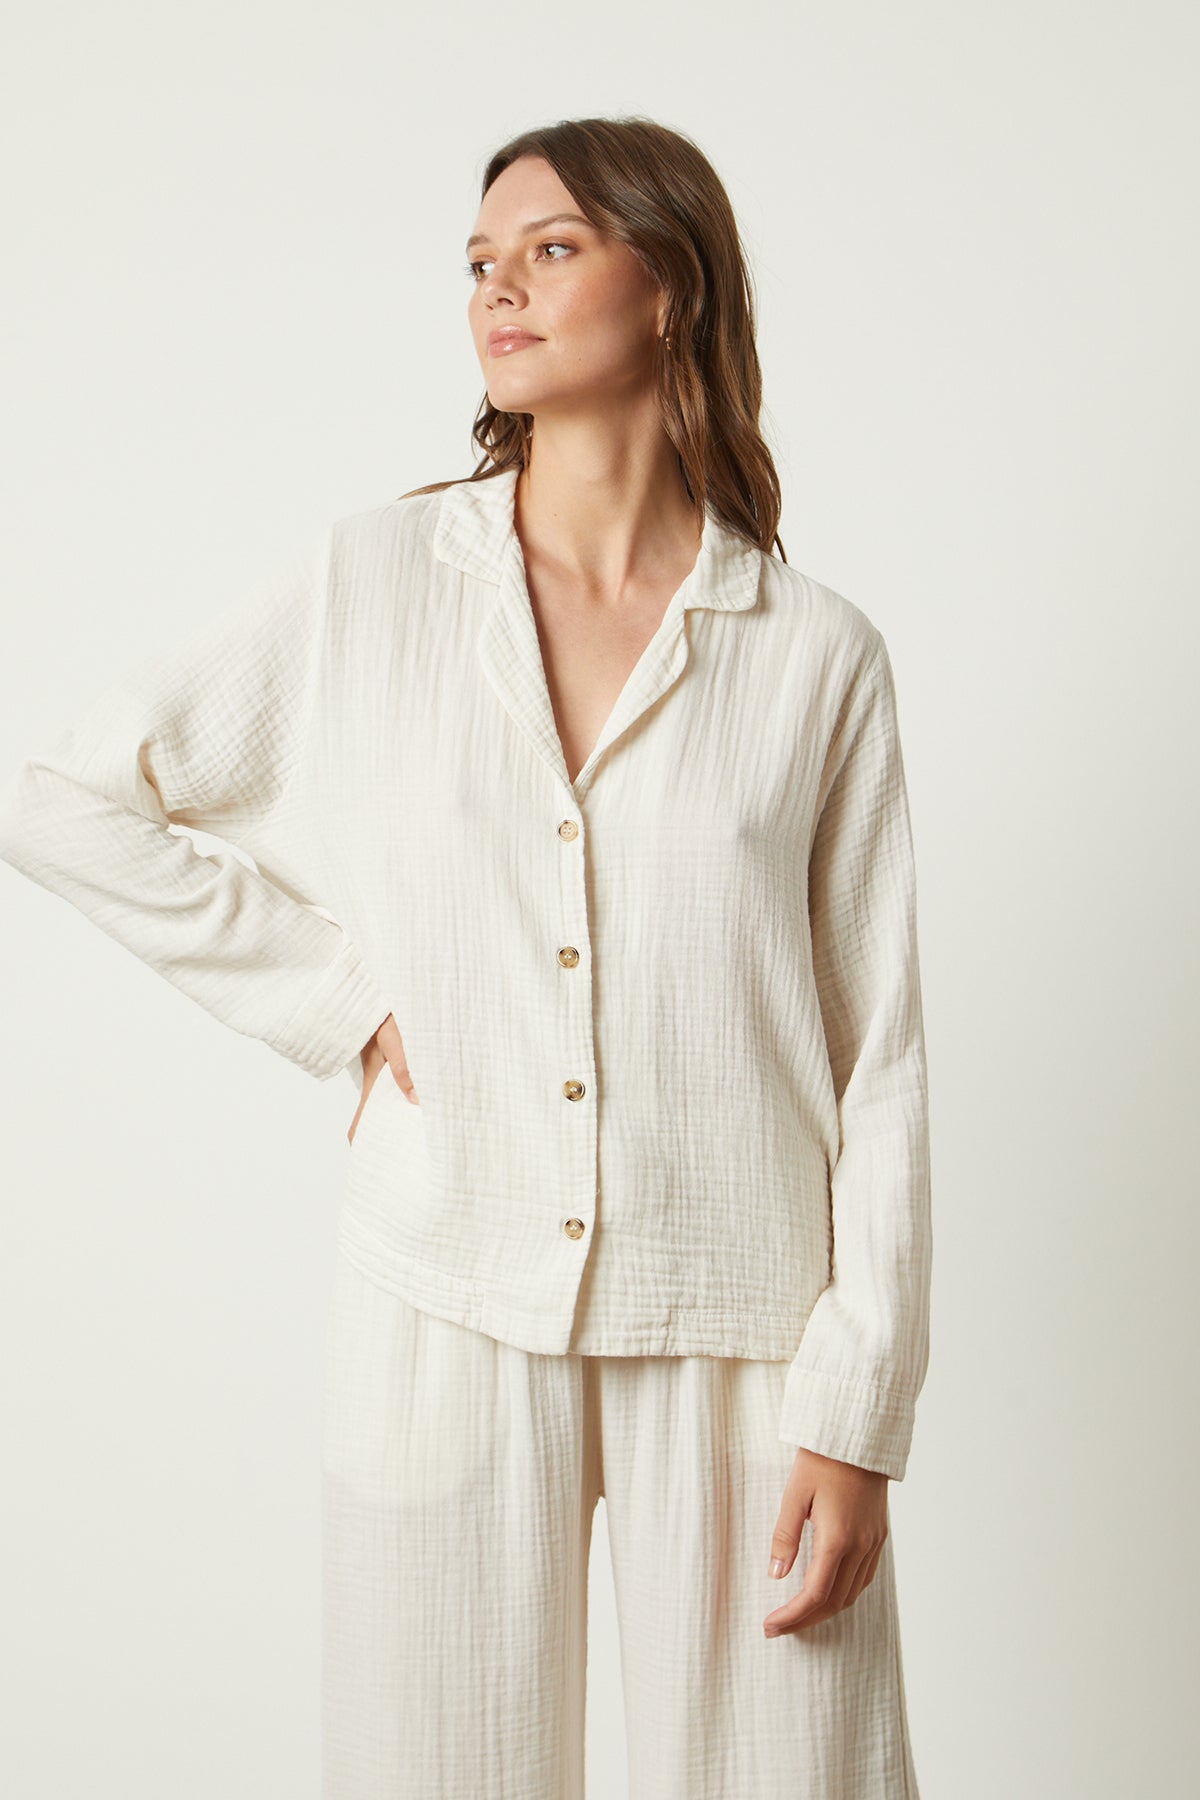   The model is wearing a white Jenny Graham Home pyjama shirt and pants. 